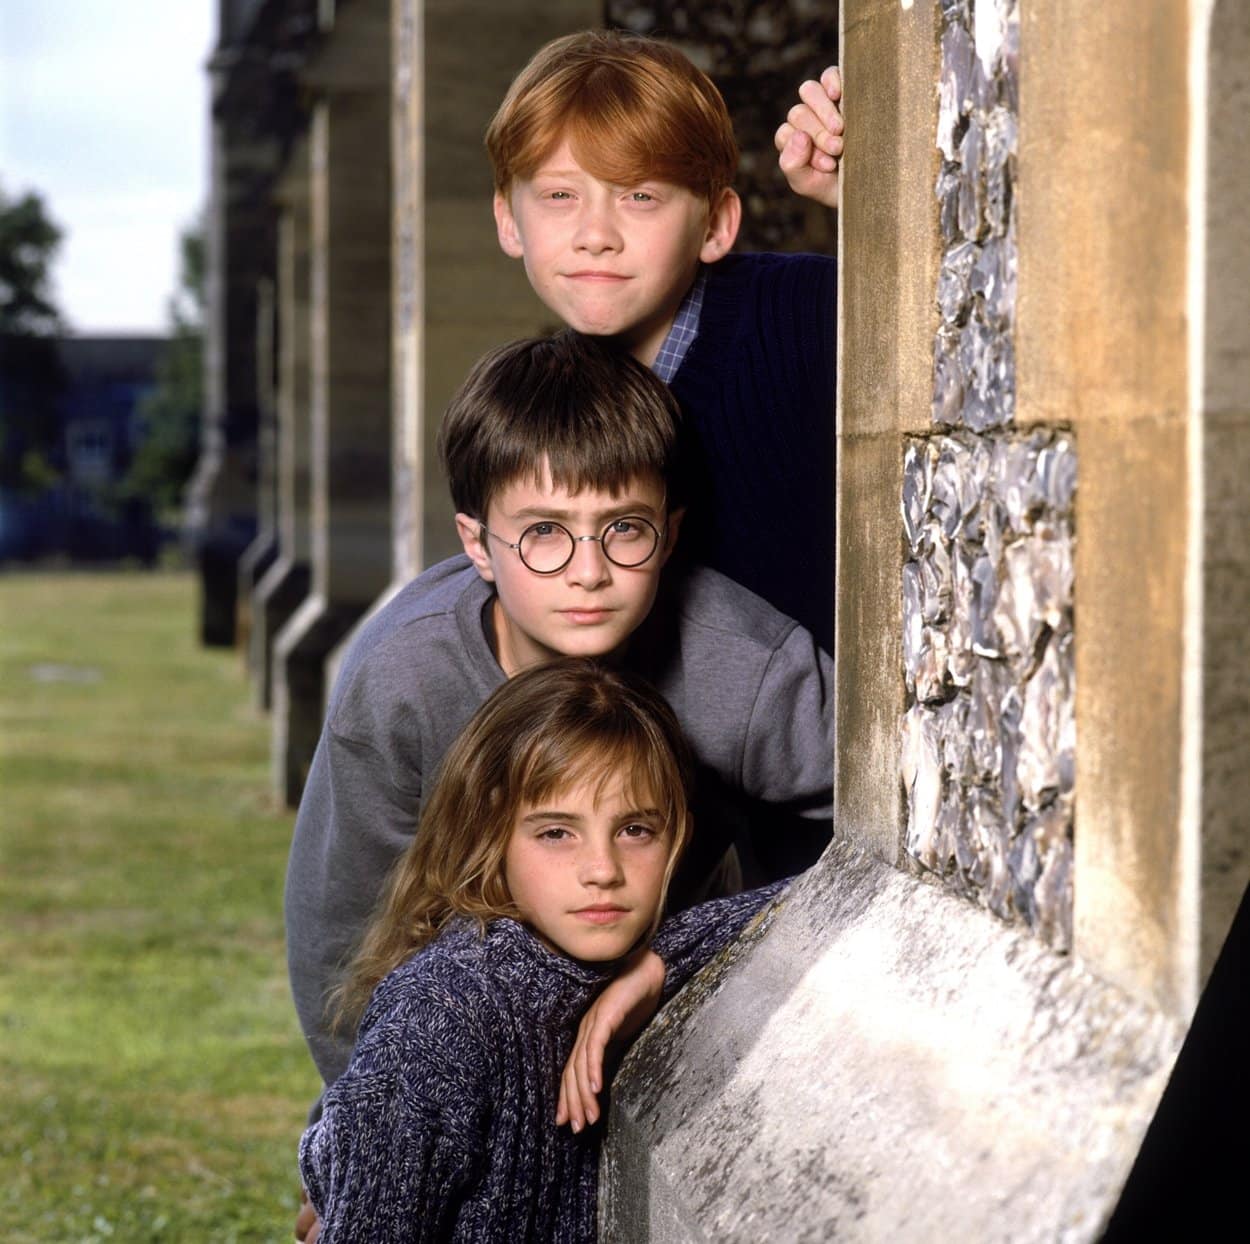 Daniel Radcliffe had some acting experience but Emma Watson and Rupert Grint had never acted prior to Harry Potter